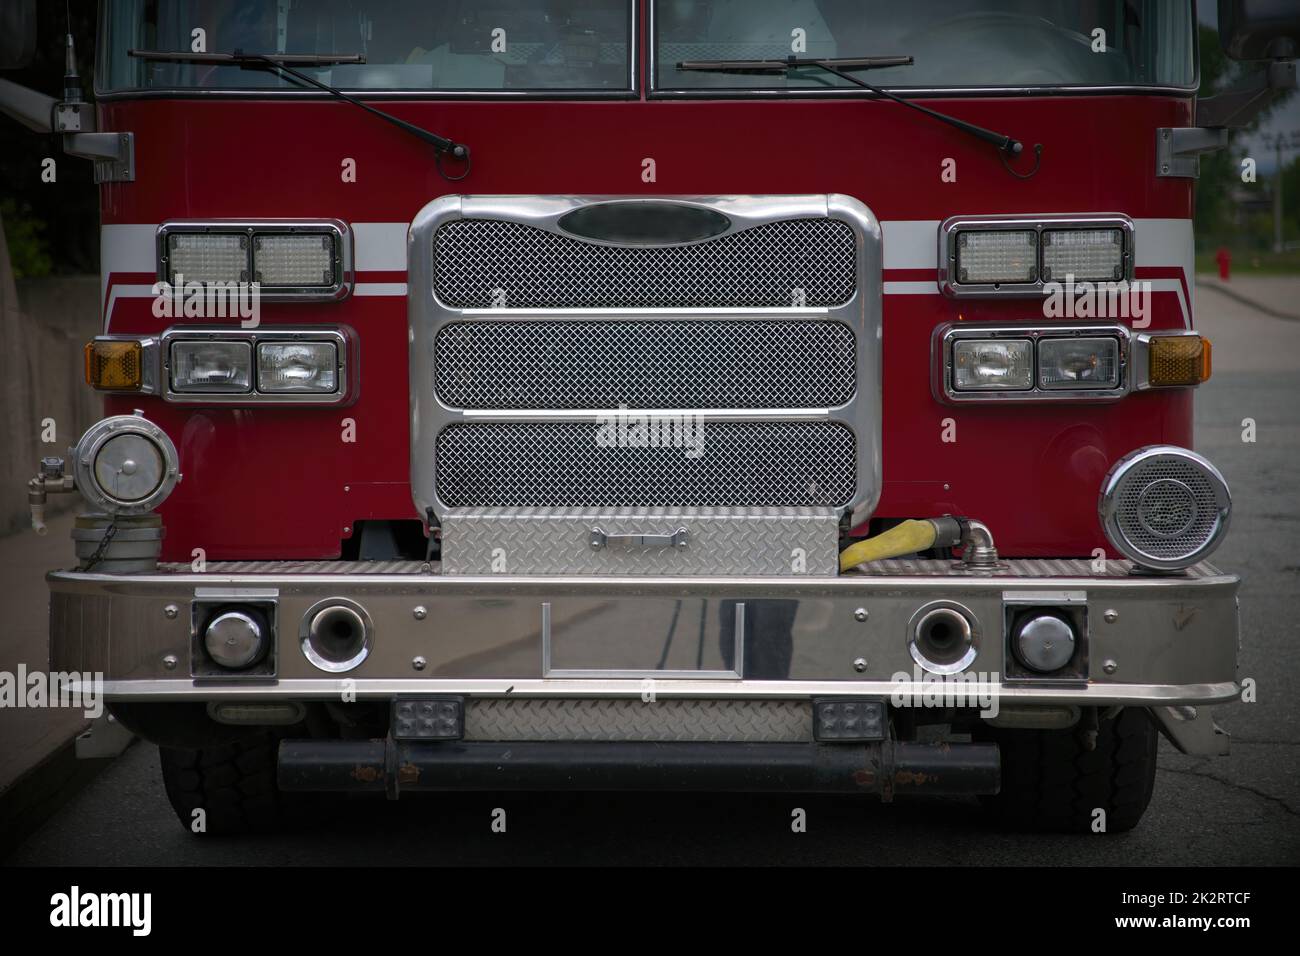 fire truck rescue firefighter red emergency vehicle front view Stock Photo